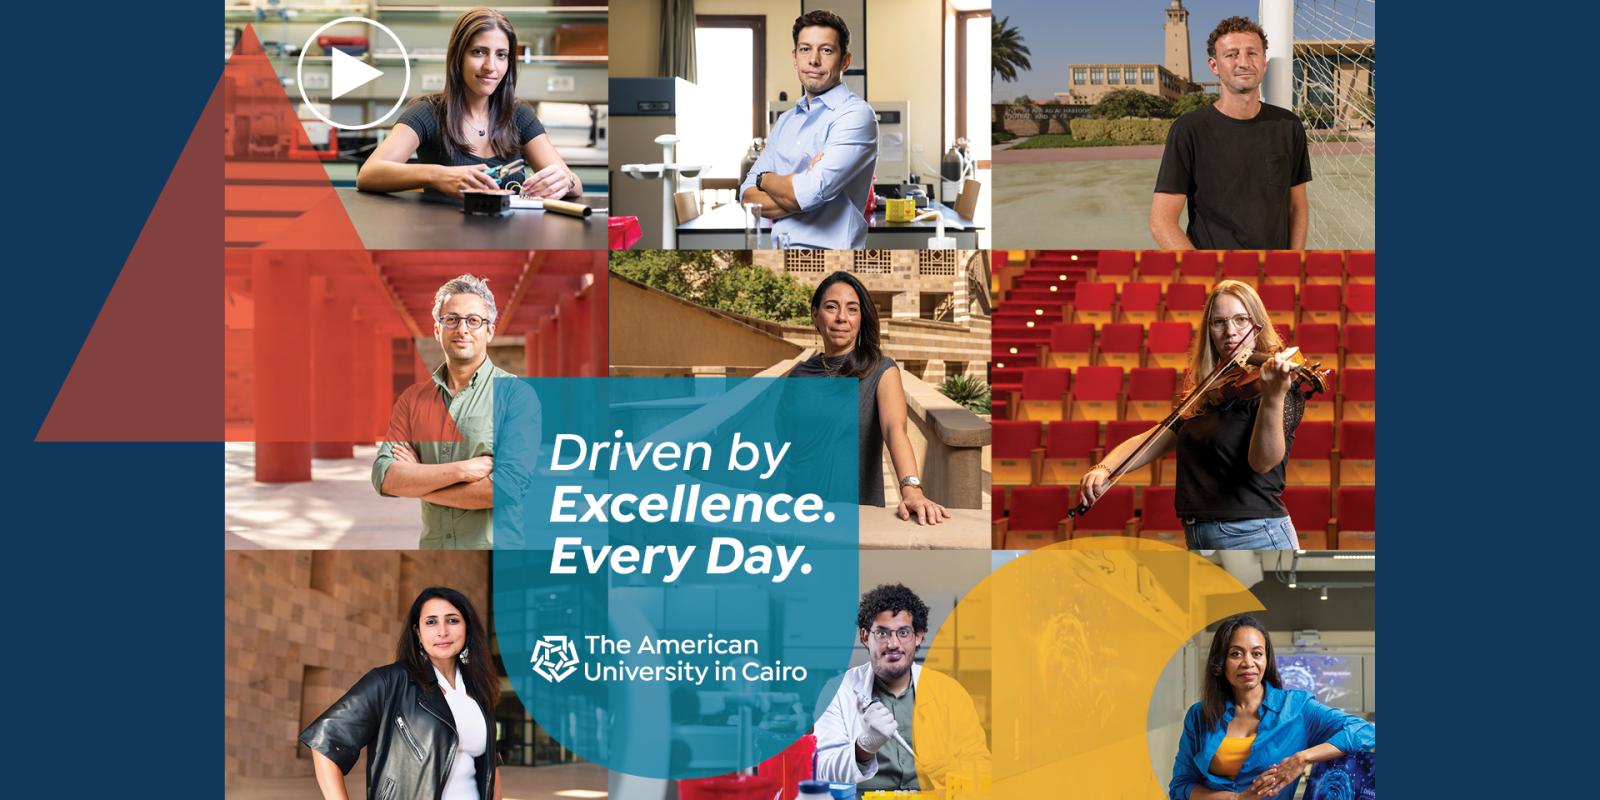 Six images of men and women, text reads "Drive by Excellence Every Day. ϲͼ"